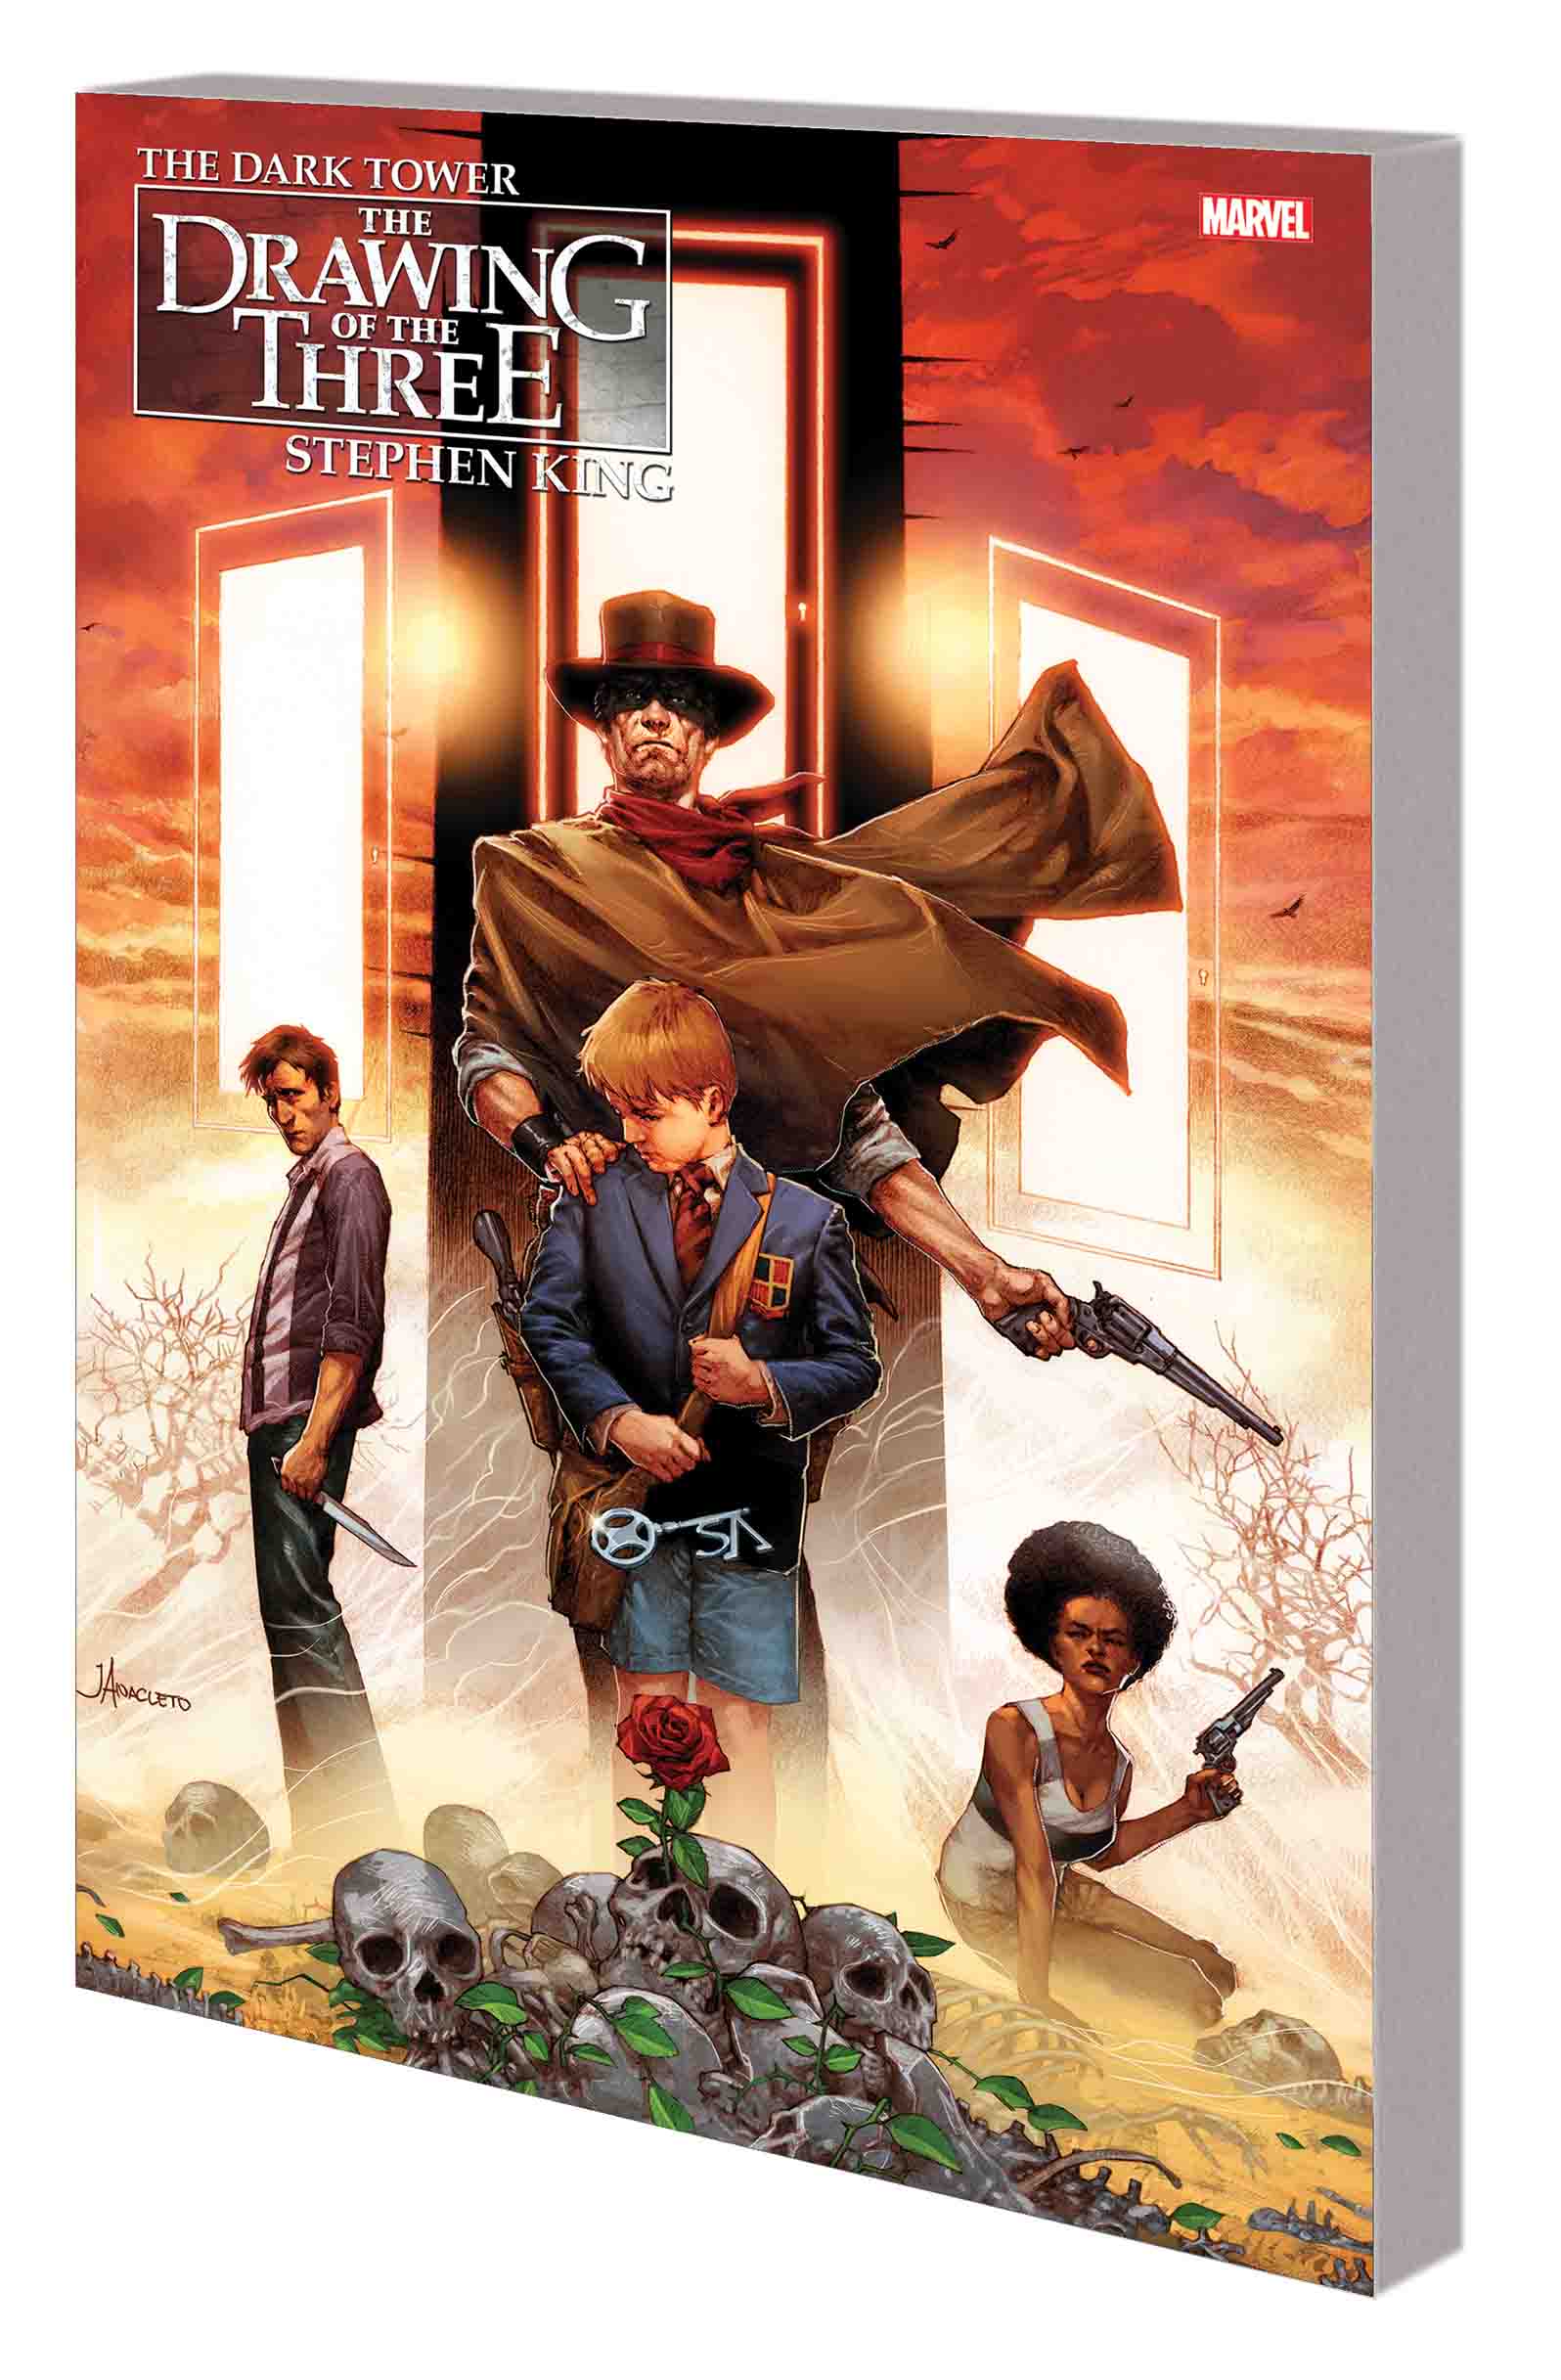 DARK TOWER: THE DRAWING OF THE THREE — THE SAILOR TPB